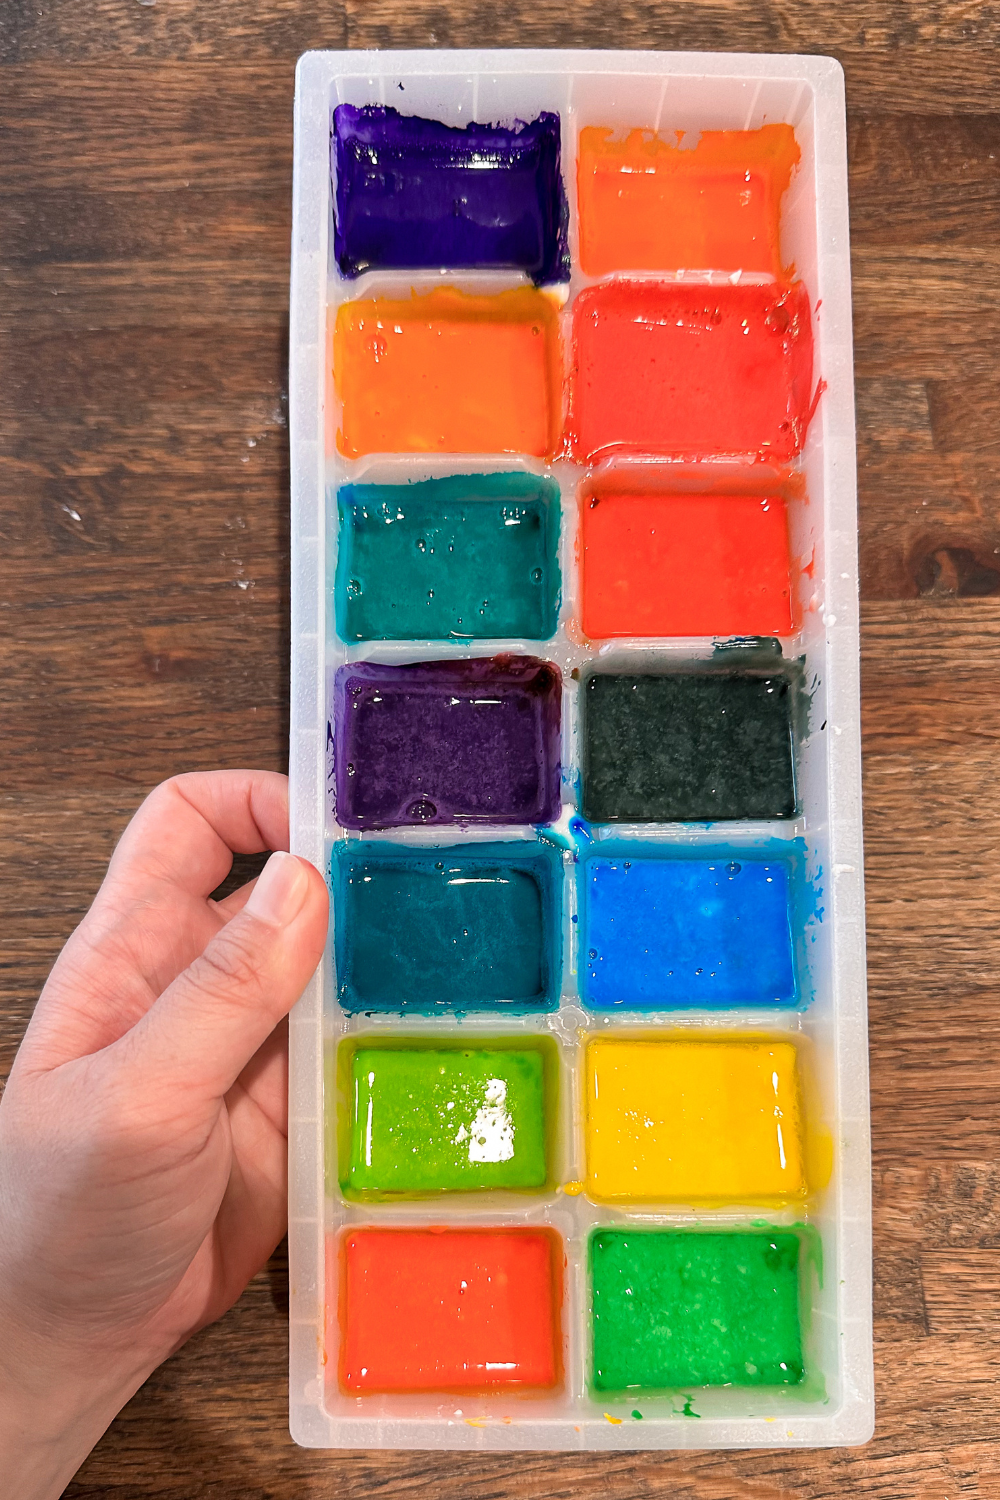 Homemade watercolor paints in a ice cube tray. Paints are wet.